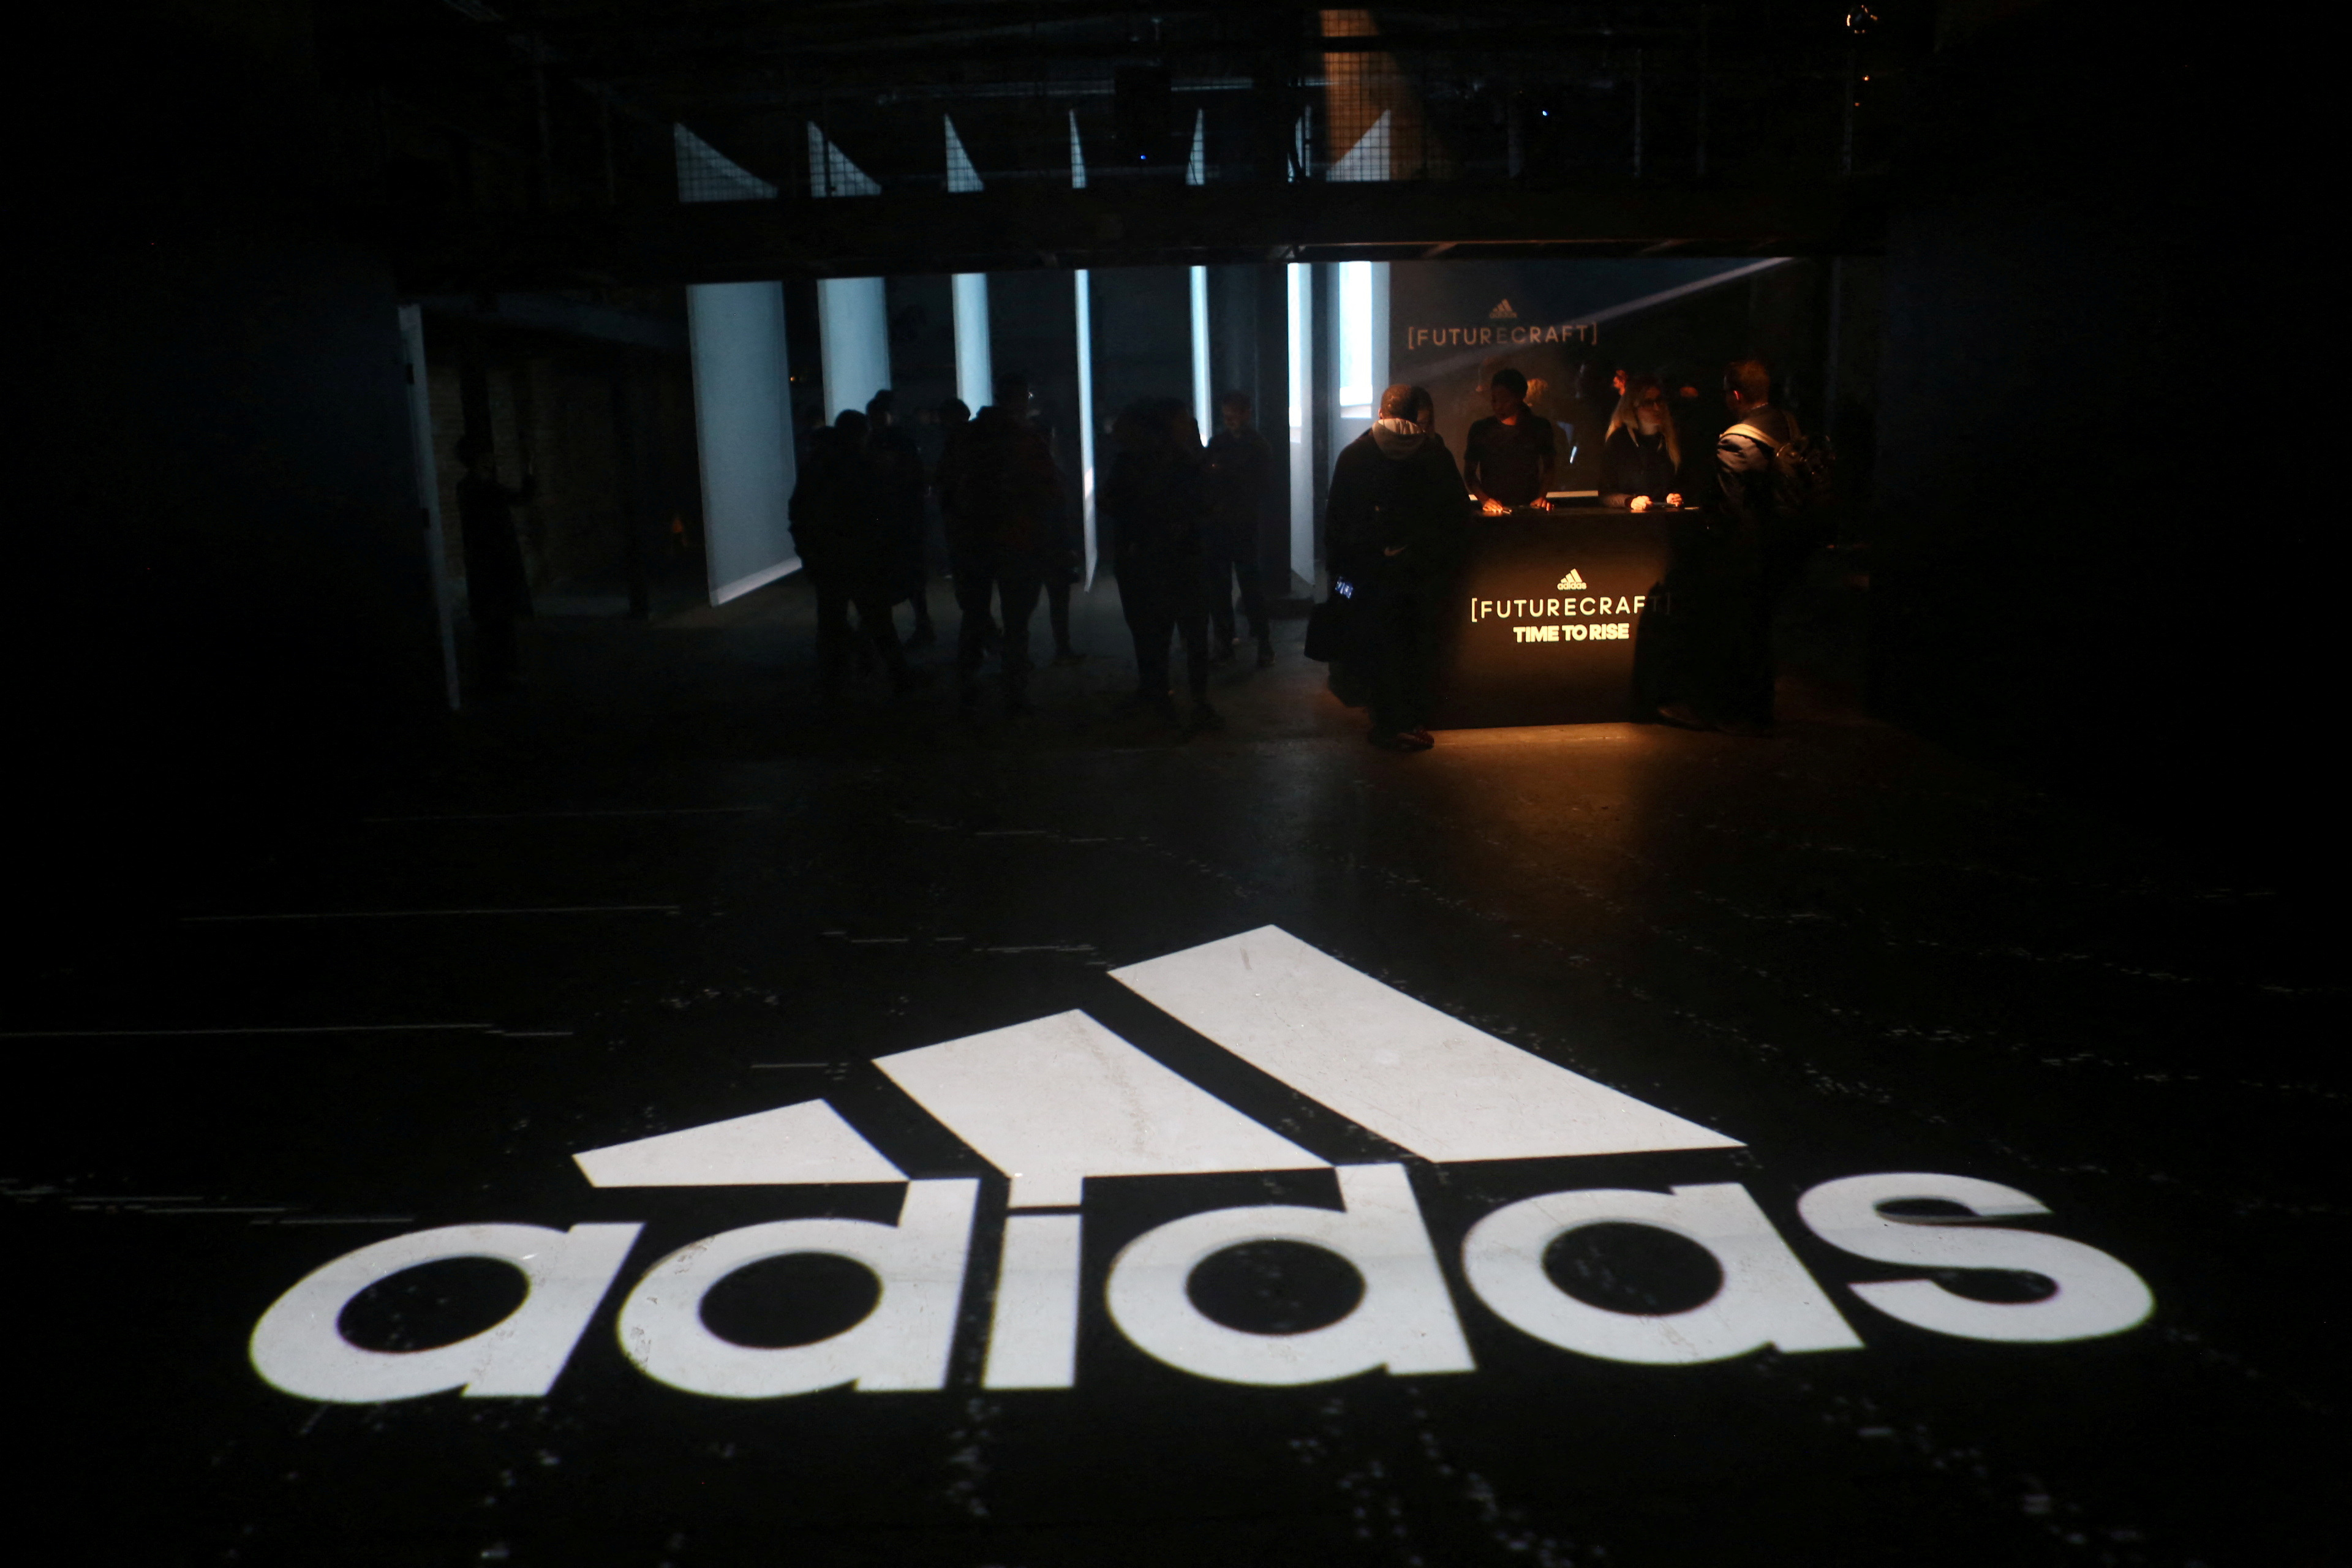 In Olympics race, Adidas pursues edge in new sports